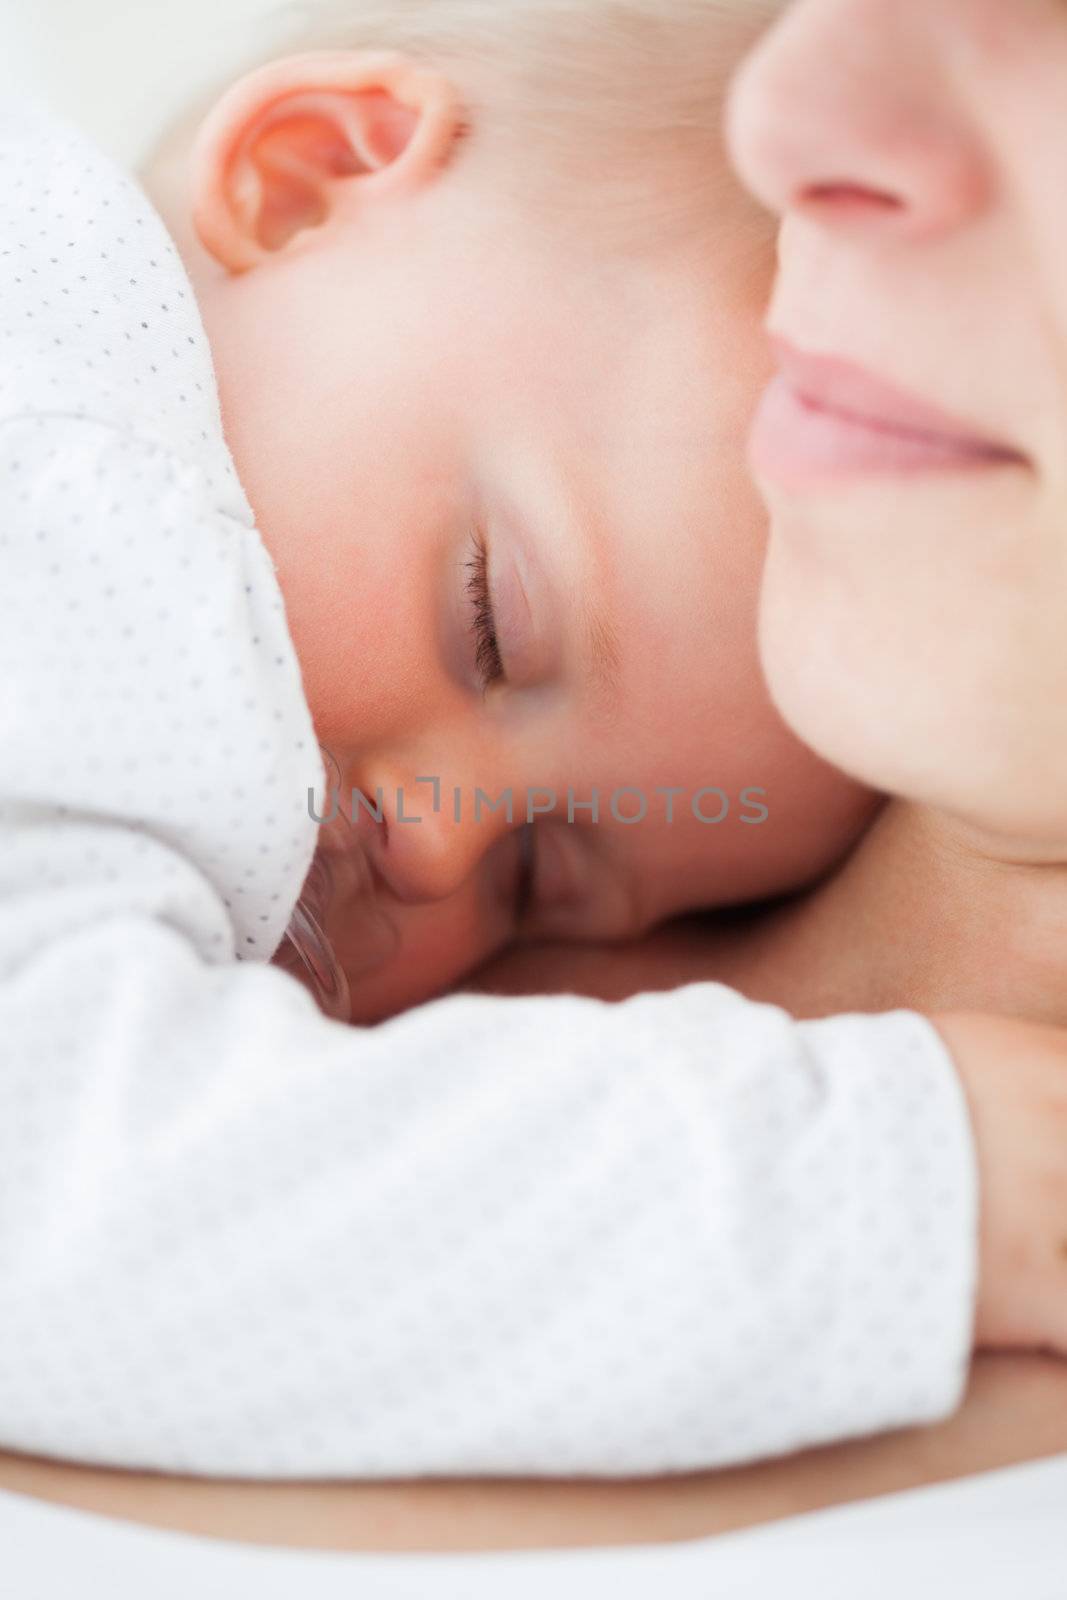 Baby napping on the chest of her mother by Wavebreakmedia